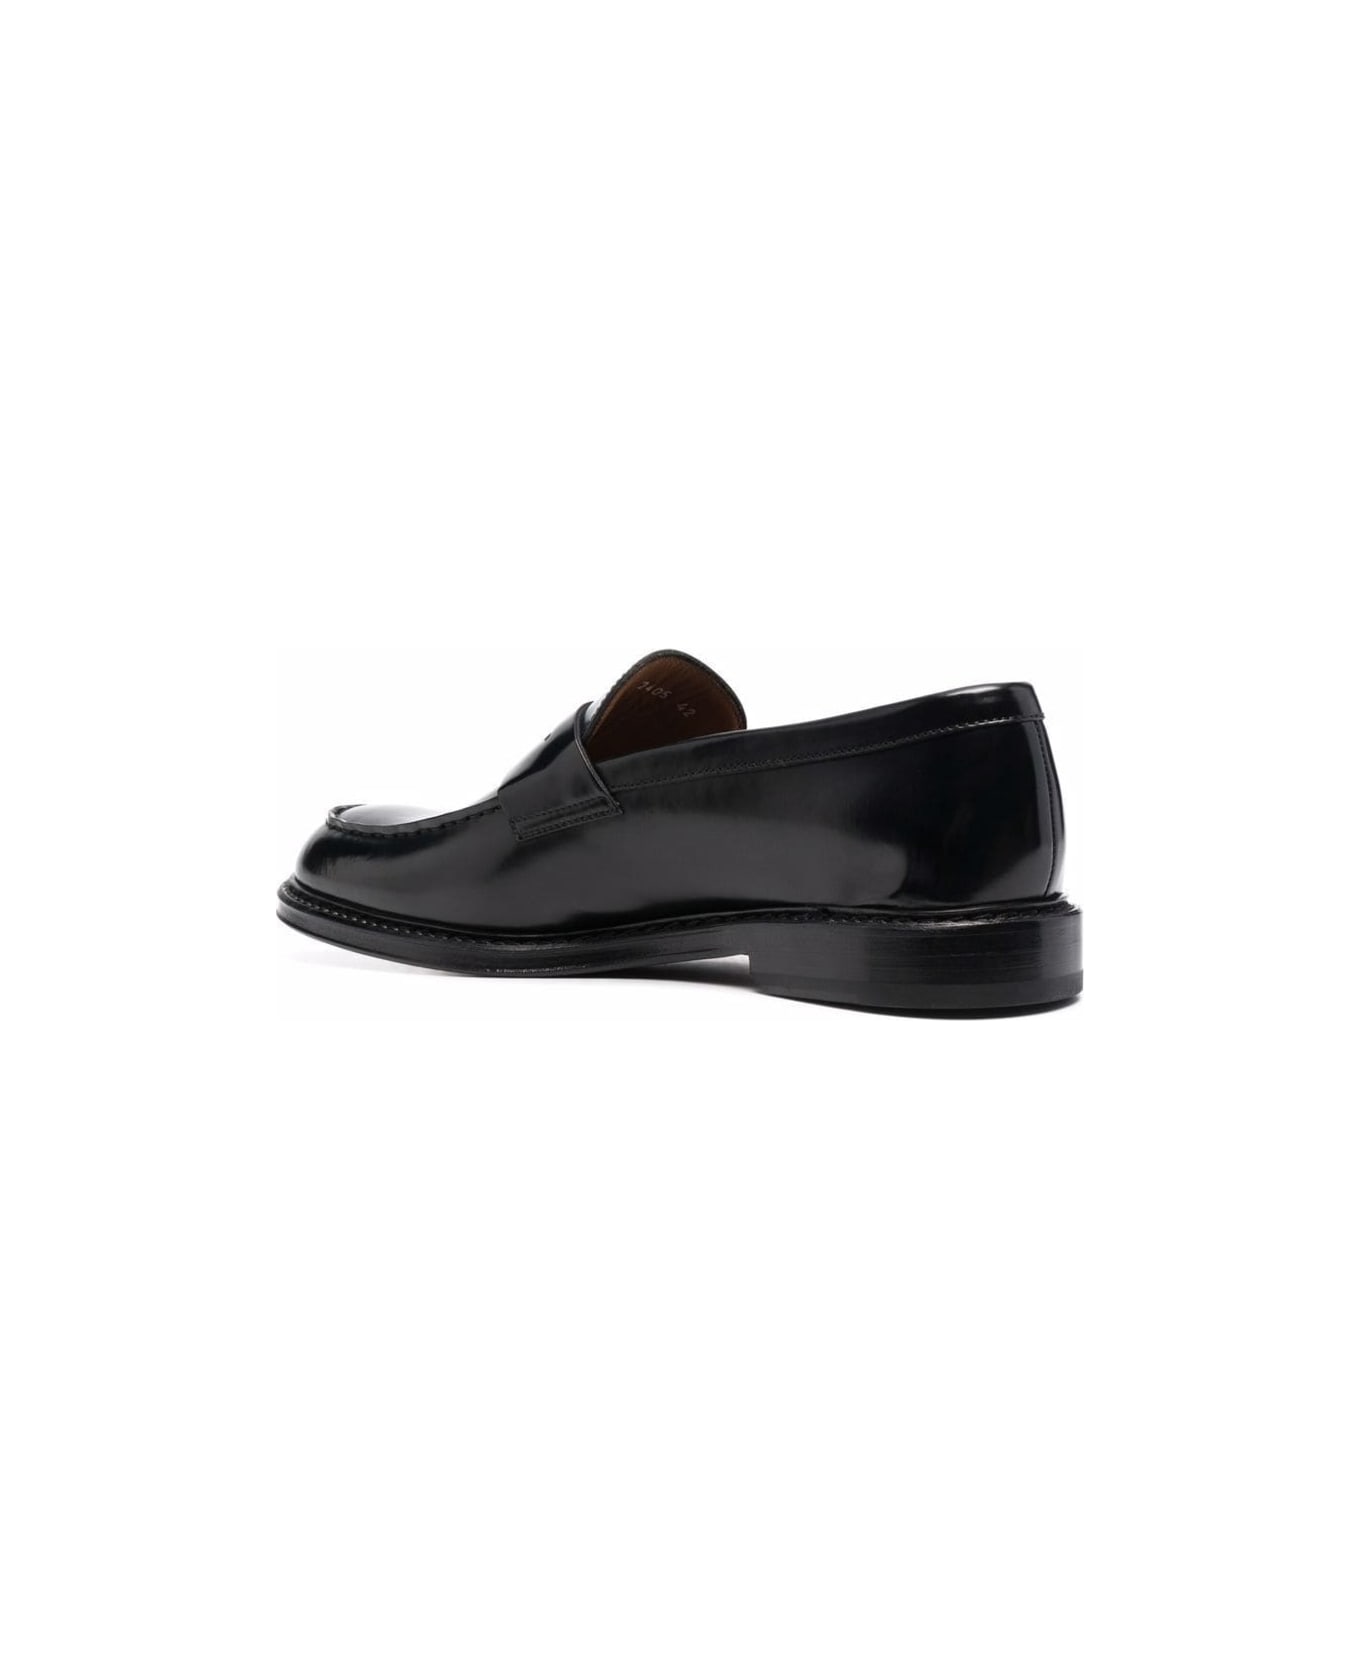 Doucal's Black Slip-on Loafers With Round Toe In Patent Leather Man - Black